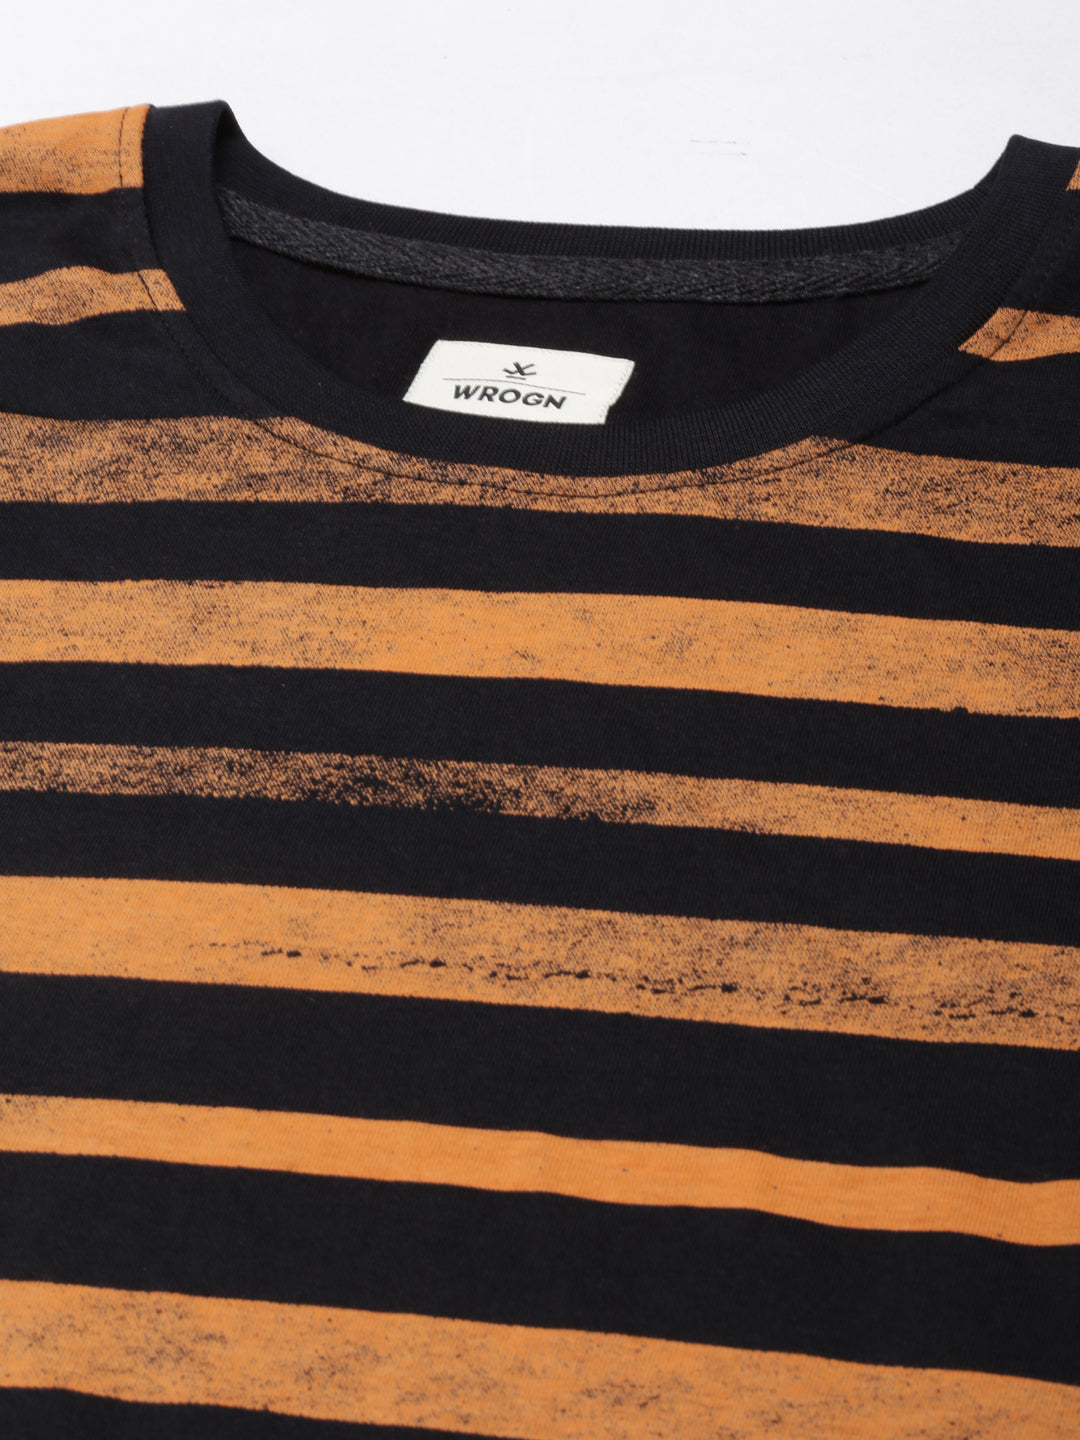 Abstract Striped Orange T-Shirt